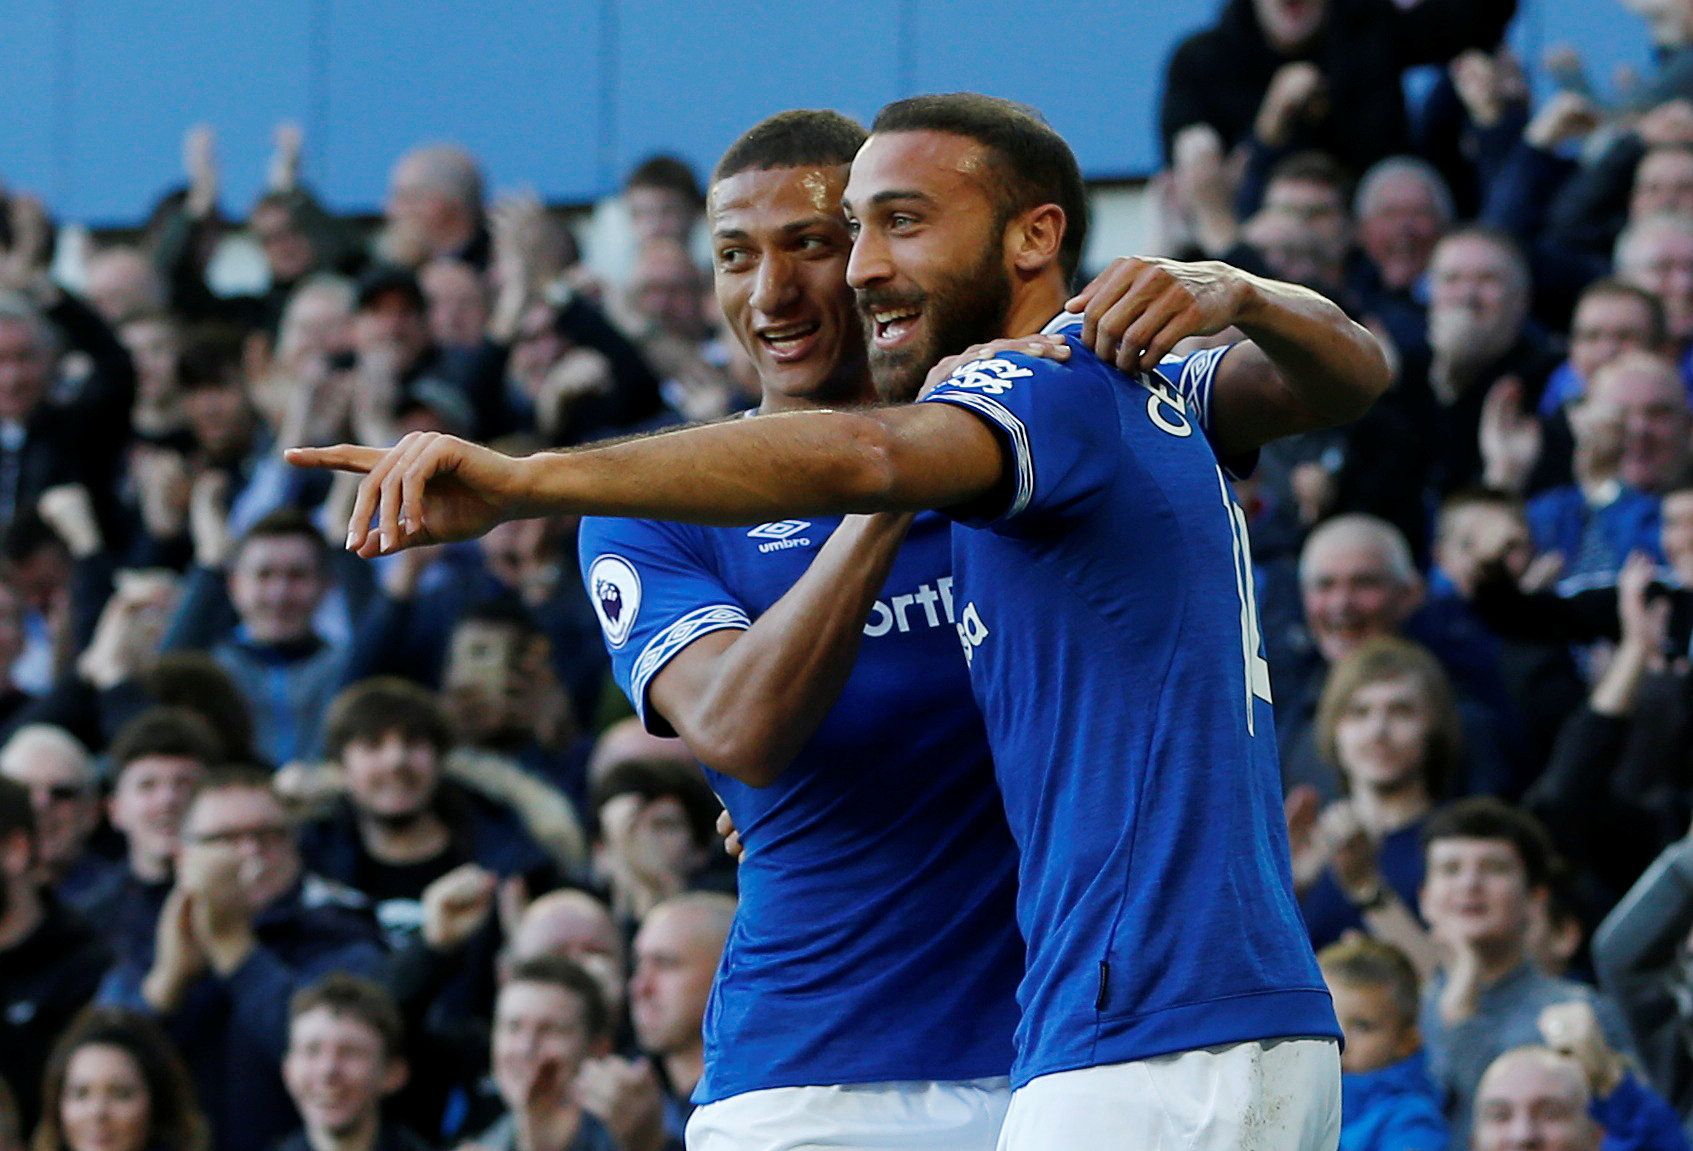 Soccer Football - Premier League - Everton v Fulham - Goodison Park, Liverpool, Britain - September 29, 2018  Everton's Cenk Tosun celebrates scoring their second goal with Richarlison   Action Images via Reuters/Ed Sykes  EDITORIAL USE ONLY. No use with unauthorized audio, video, data, fixture lists, club/league logos or 